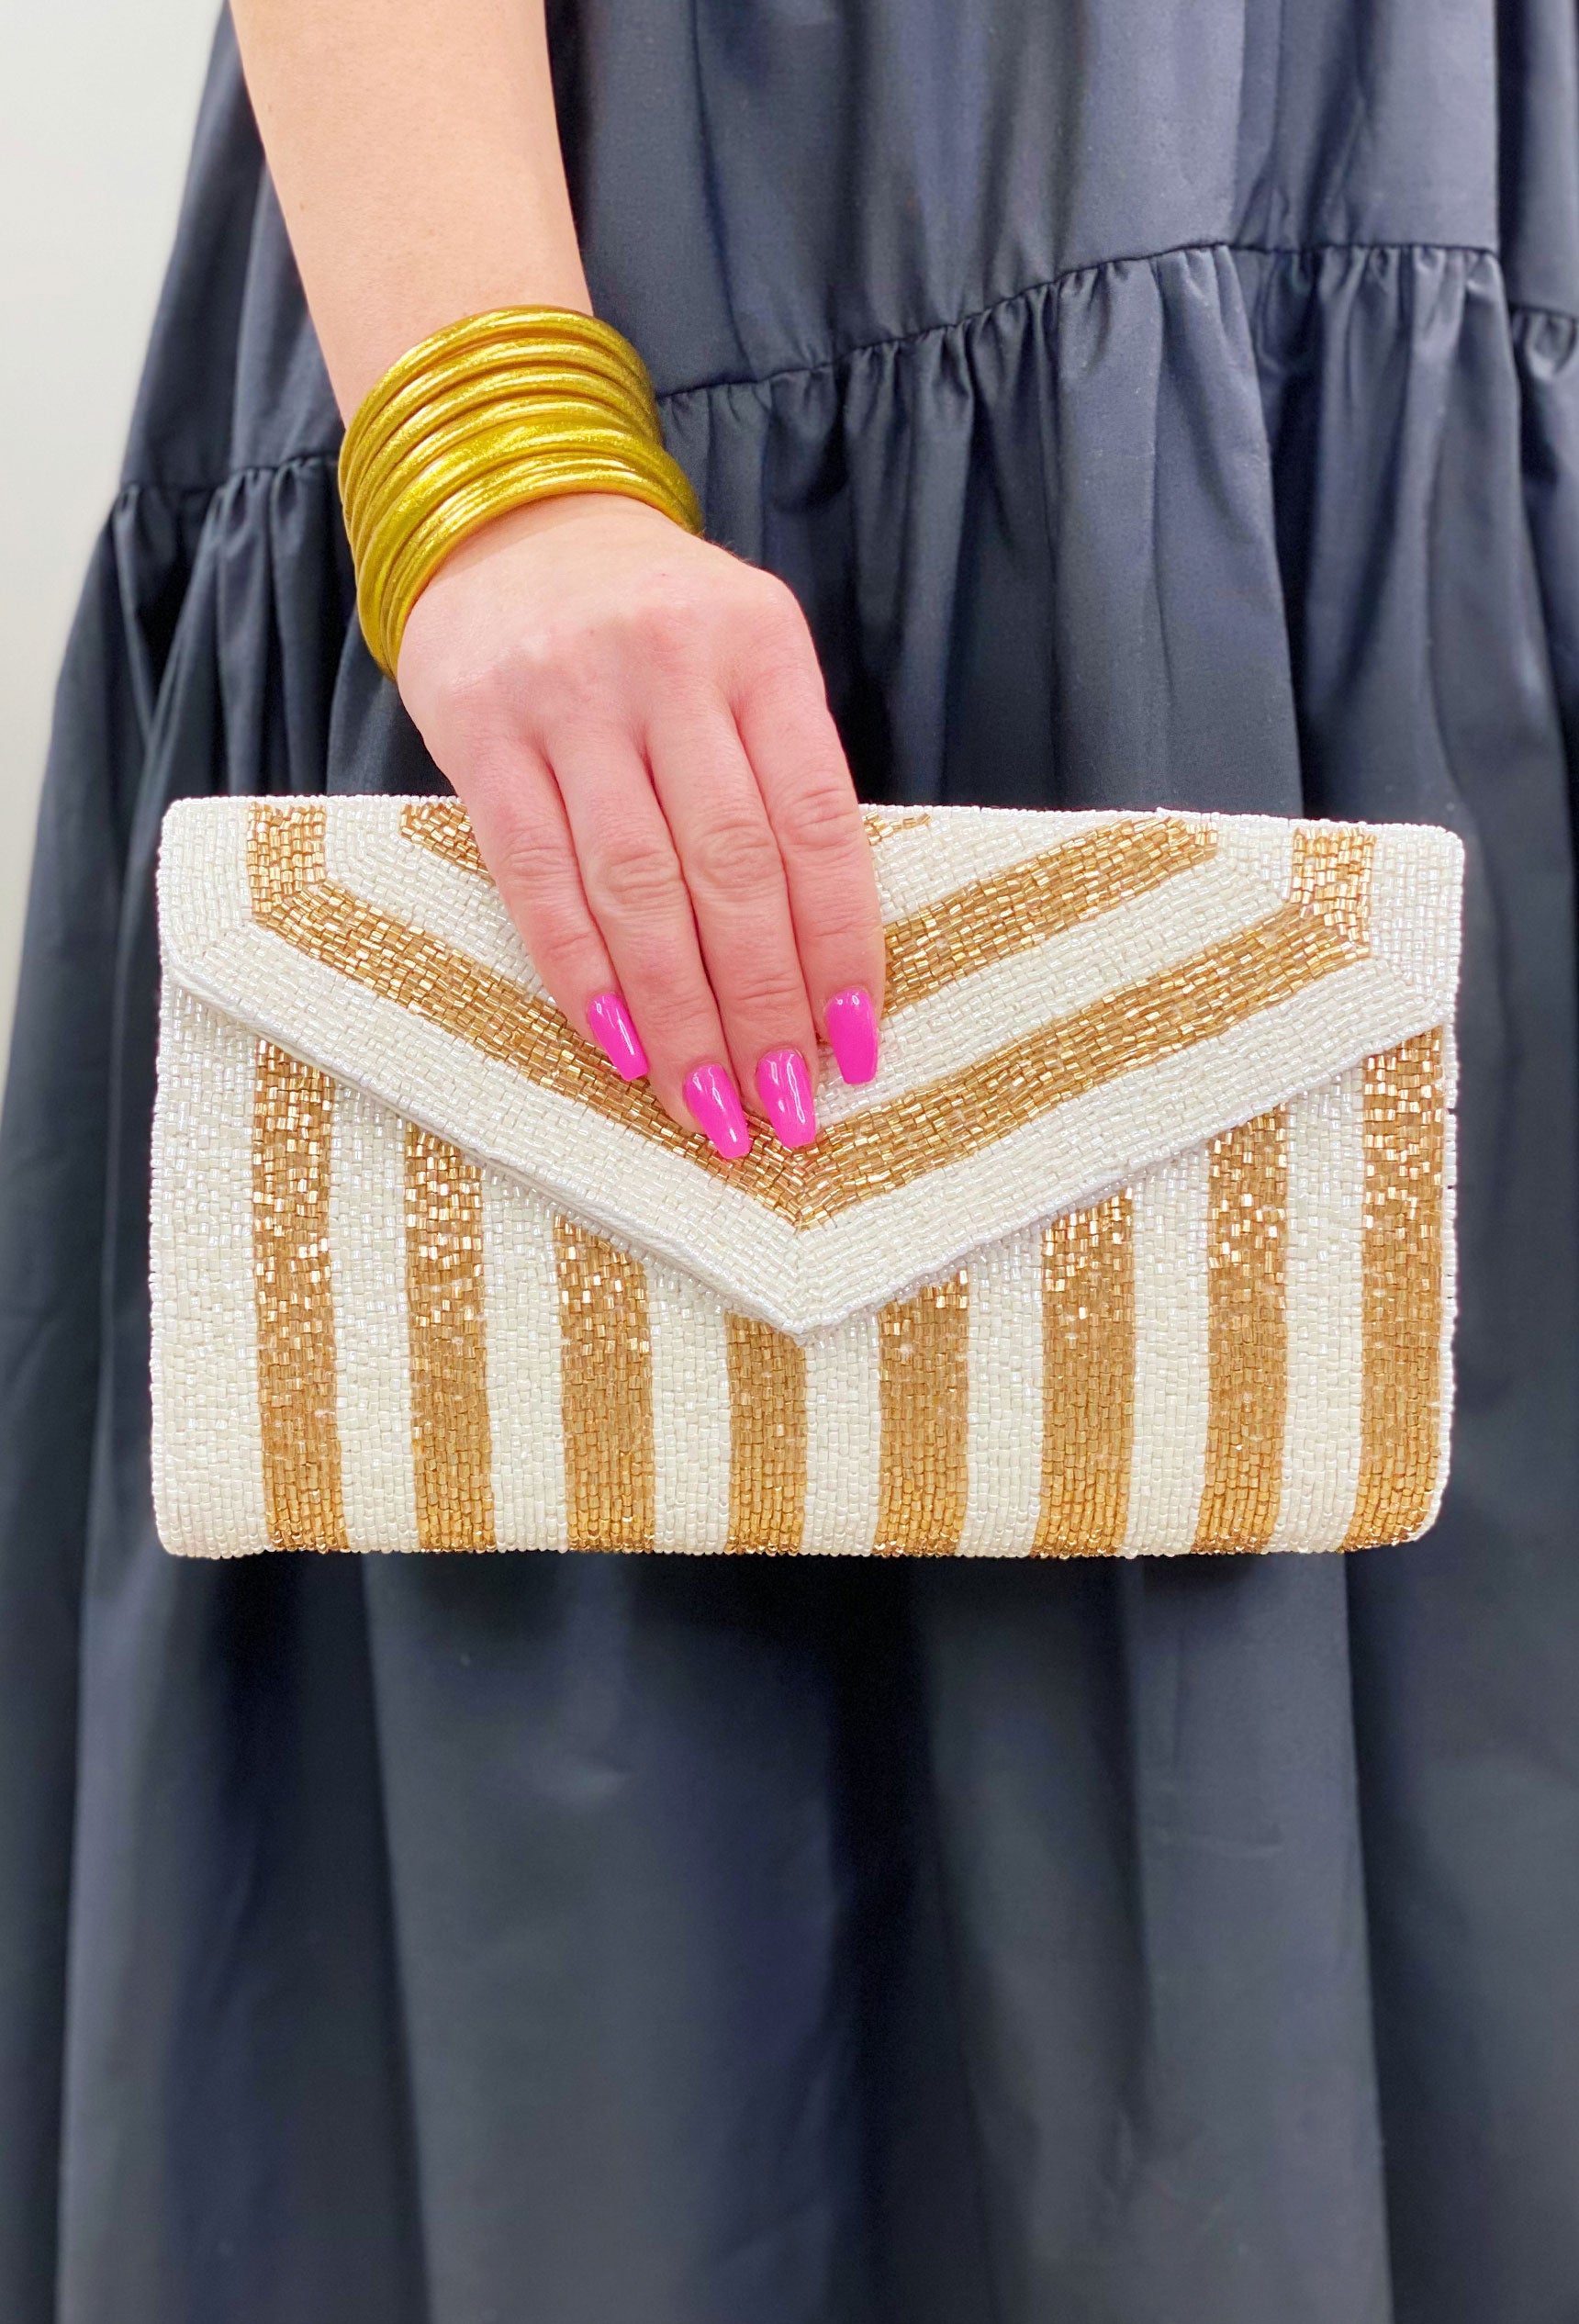 A Night Out Beaded Clutch in White, white and gold striped beaded clutch